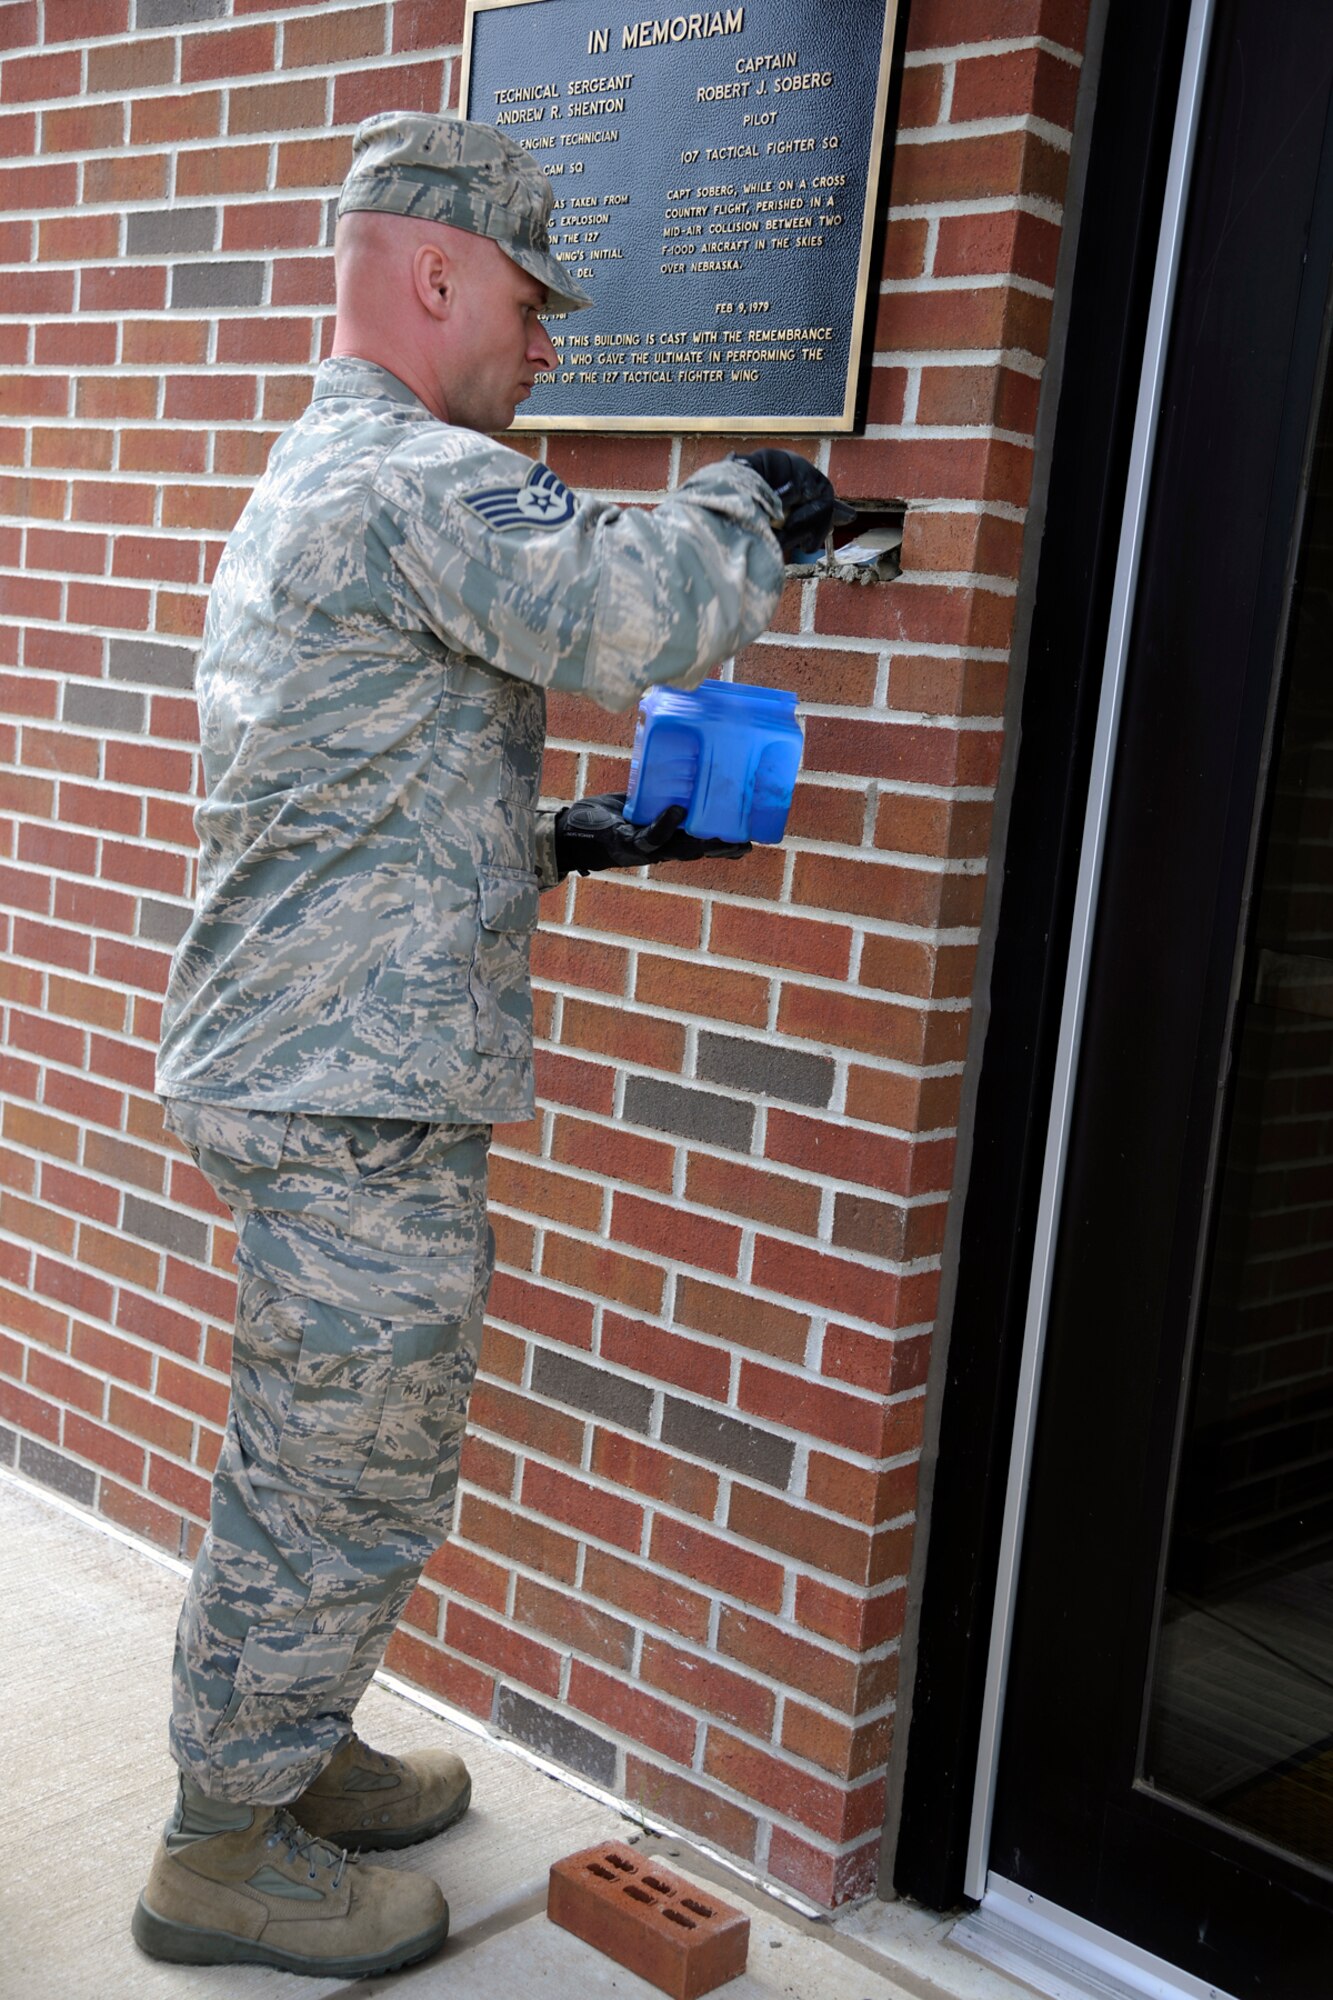 130609-Z-EZ686-022 -- Staff Sgt. Derek Leppek, 127th Civil Engineer Squadron, mortars a the final brick in to place during a building re-dedication ceremony for the 127th Operations Group Building at Selfridge Air National Guard Base, Mich., June 9, 2013. During the ceremony the building, which underwent a $6.6 million overhaul, was re-dedicated to two former members of the 127th, Capt. Robert J. Soderberg and Technical Sgt. Andrew R. Shenton, who were killed in separate incidents while on duty in 1979 and 1981, respectively. (U.S. Air National Guard photo by TSgt. David Kujawa / Released)